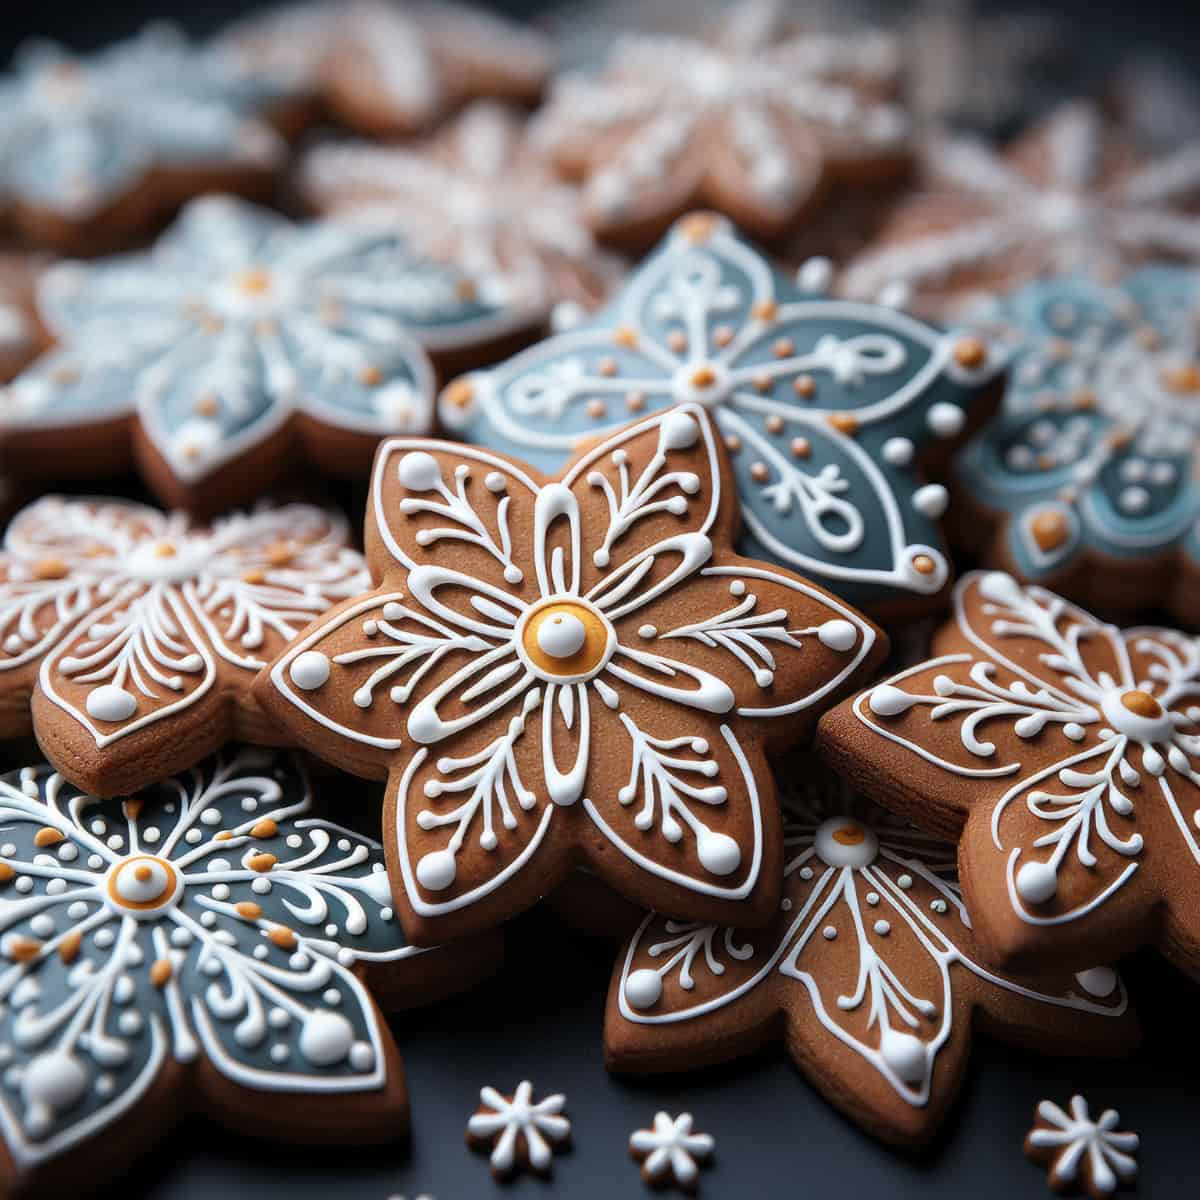 Star shaped gingerbread cookies with piped royal frosting 